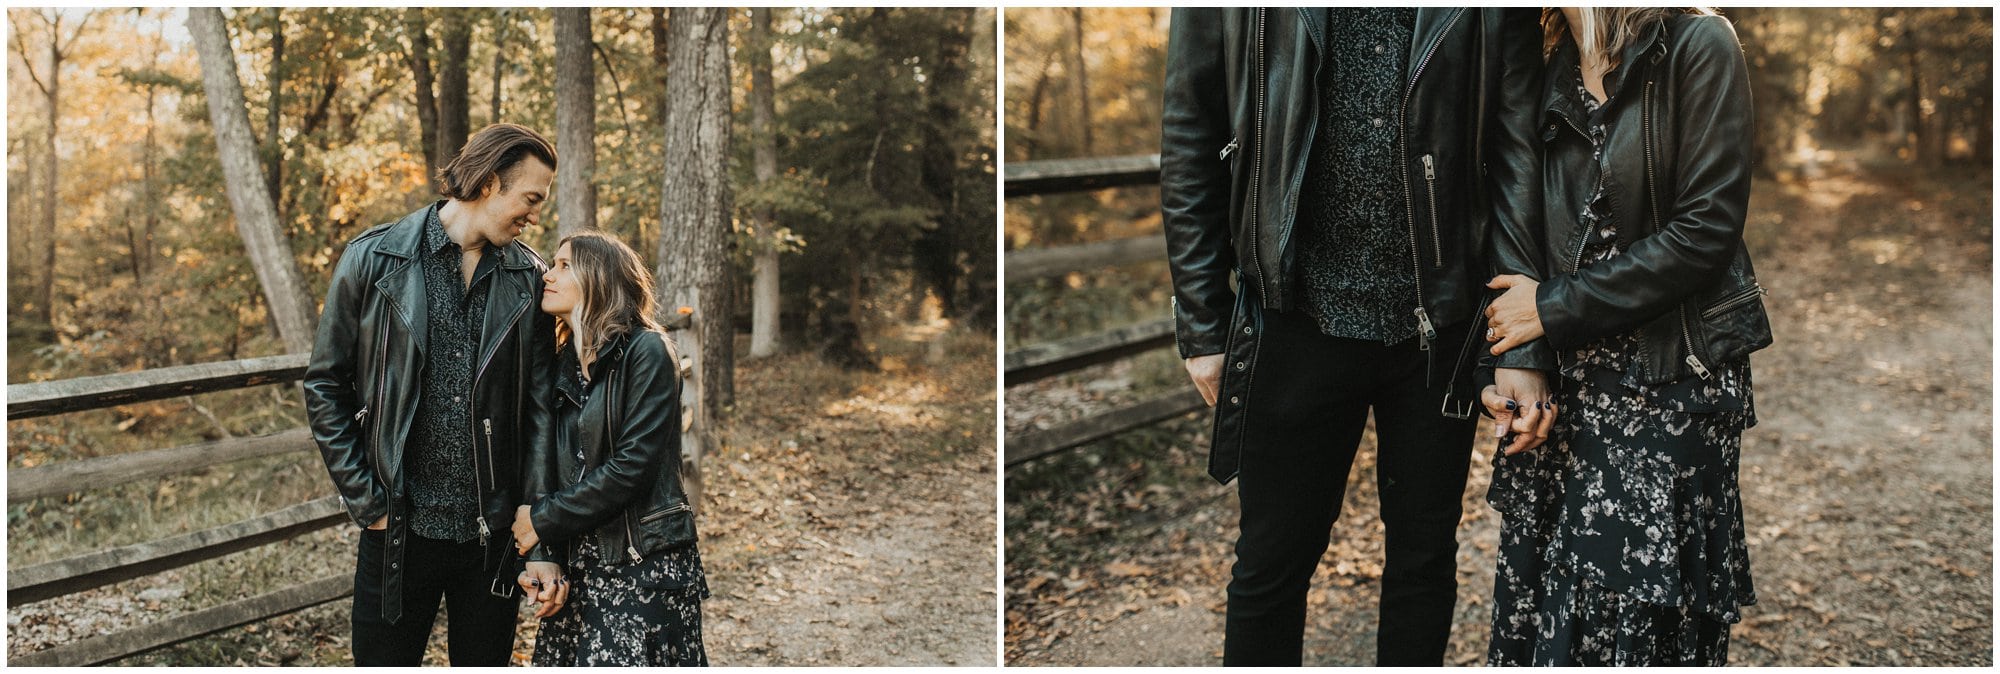 cool hipster engagement session, leather jacket bride, couple in leather jacket 